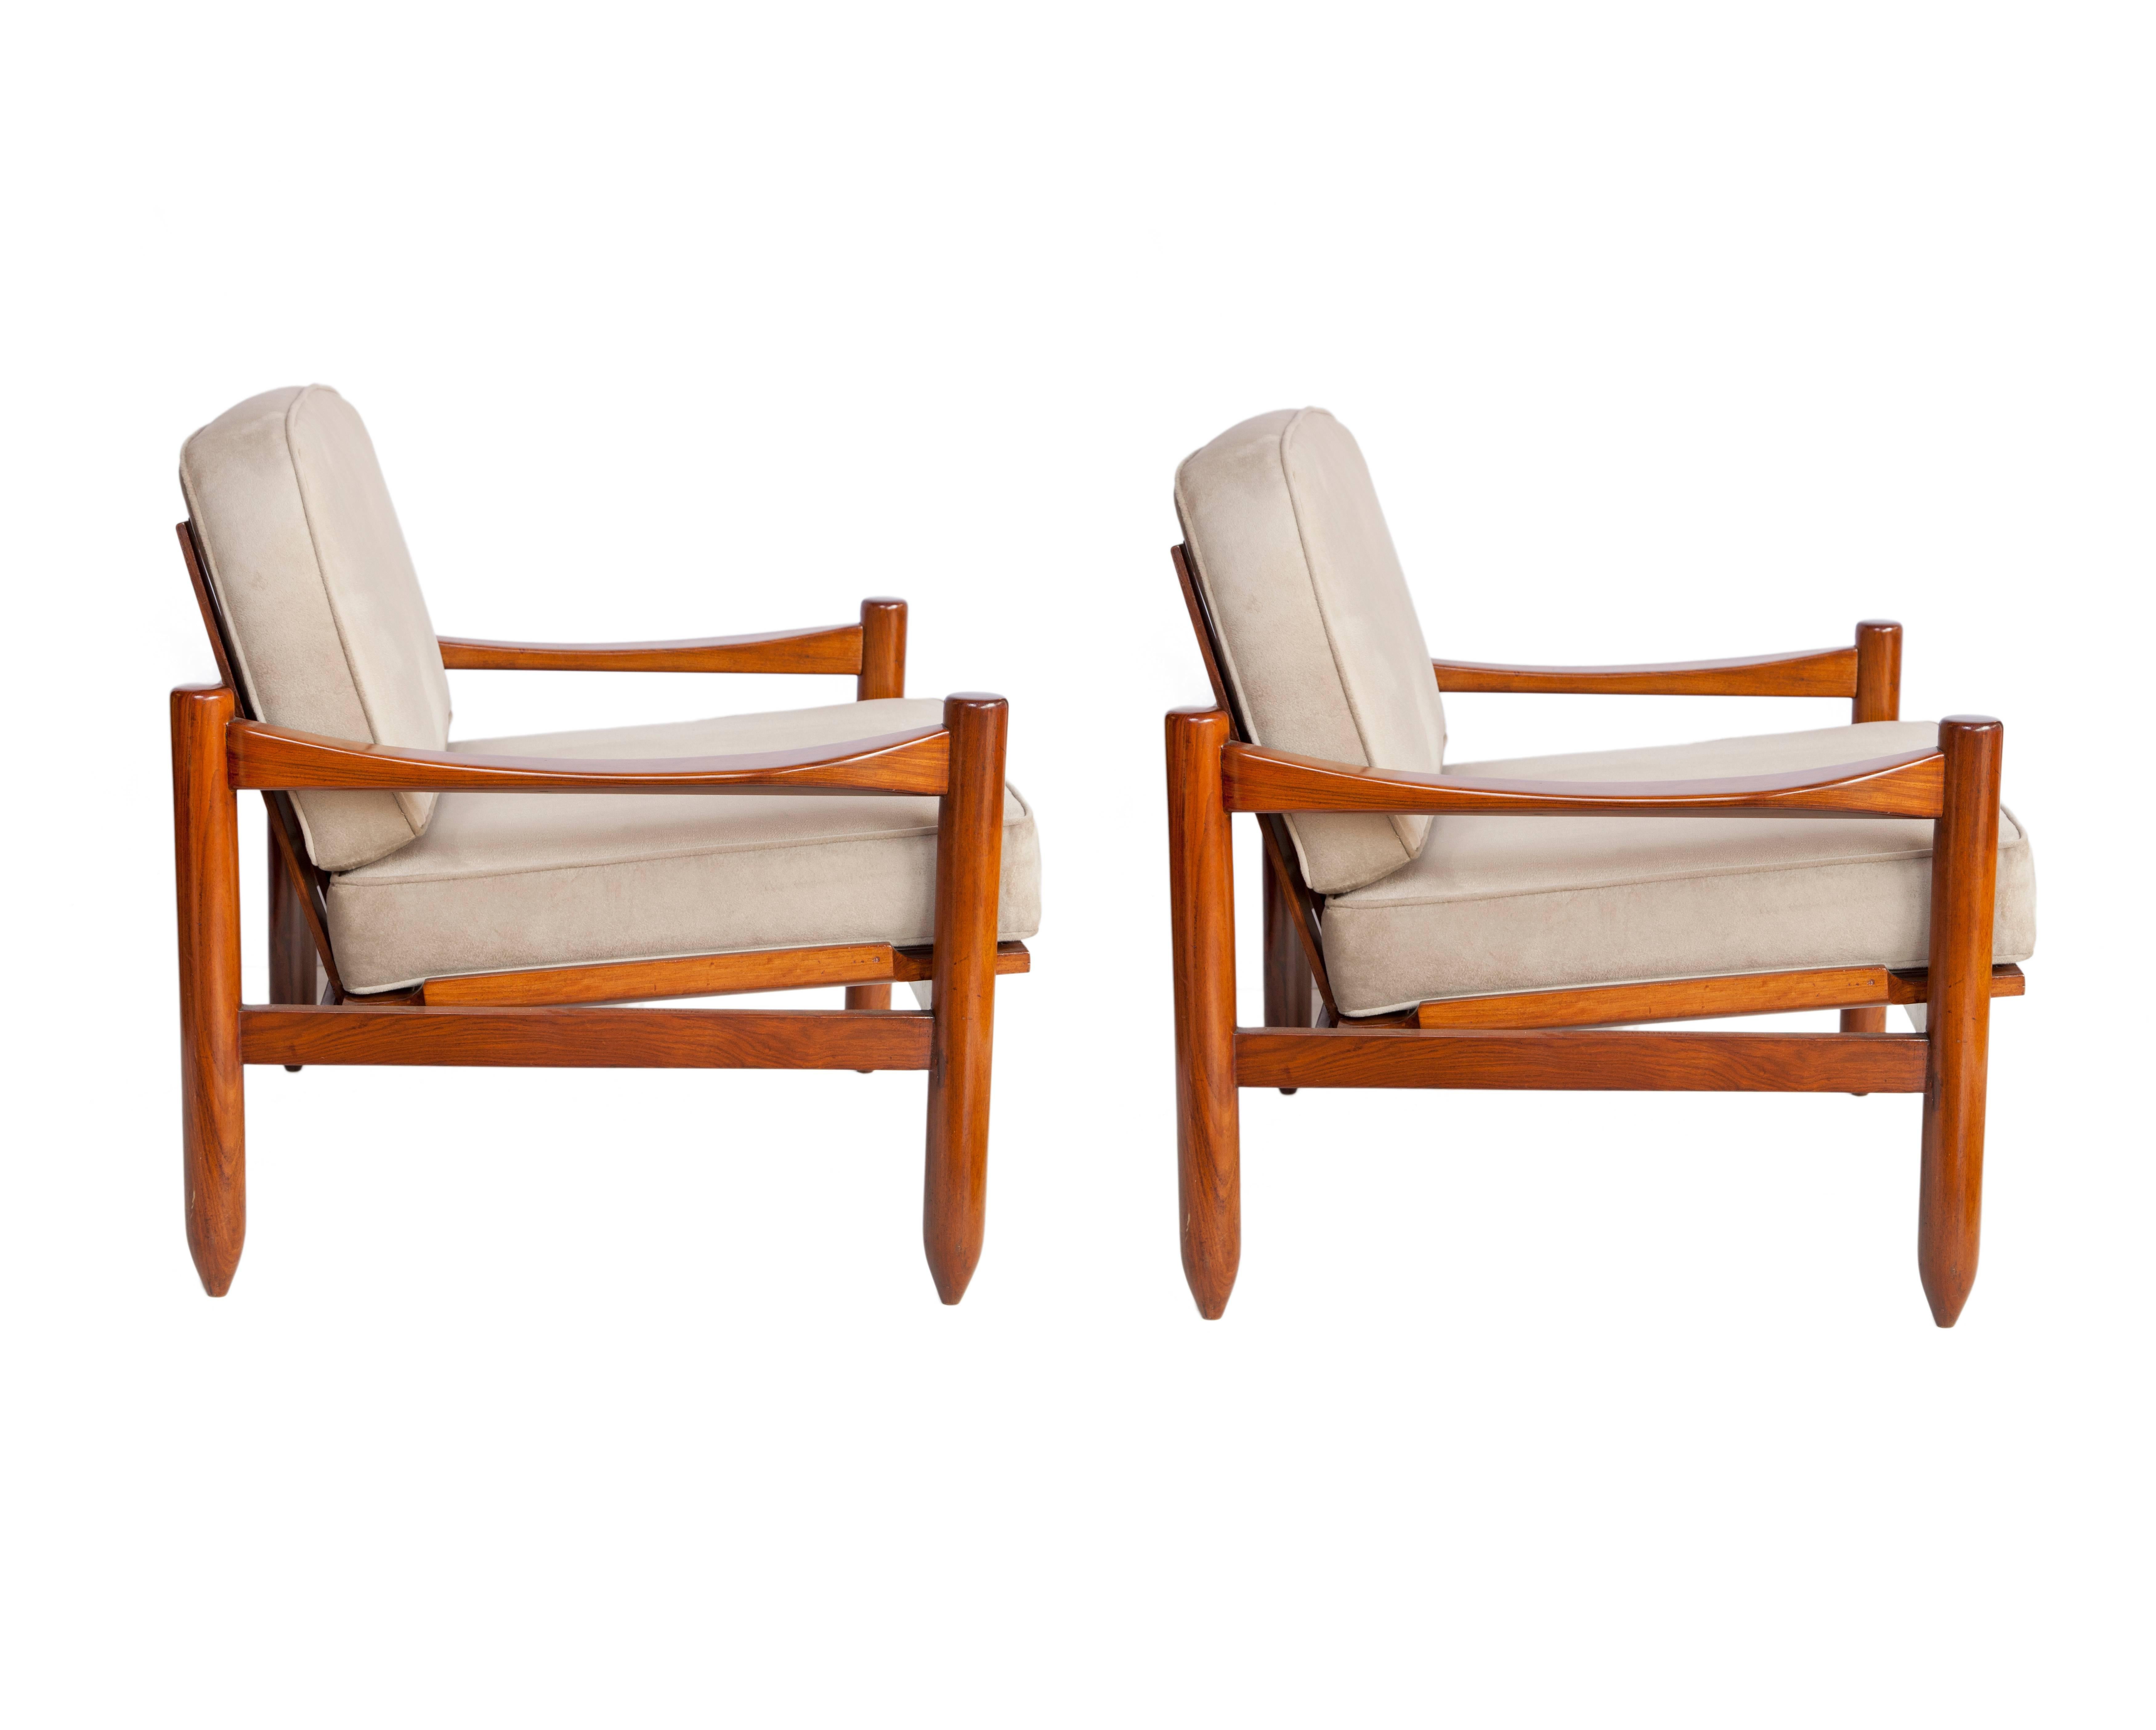 Michel Arnoult armchairs produced in Brazil, circa 1960. The frames are crafted in Jacaranda and stand on four pillar legs with pointed feet. The arms feature a curved indent for style and comfort with a planked backrest. Cushions recently